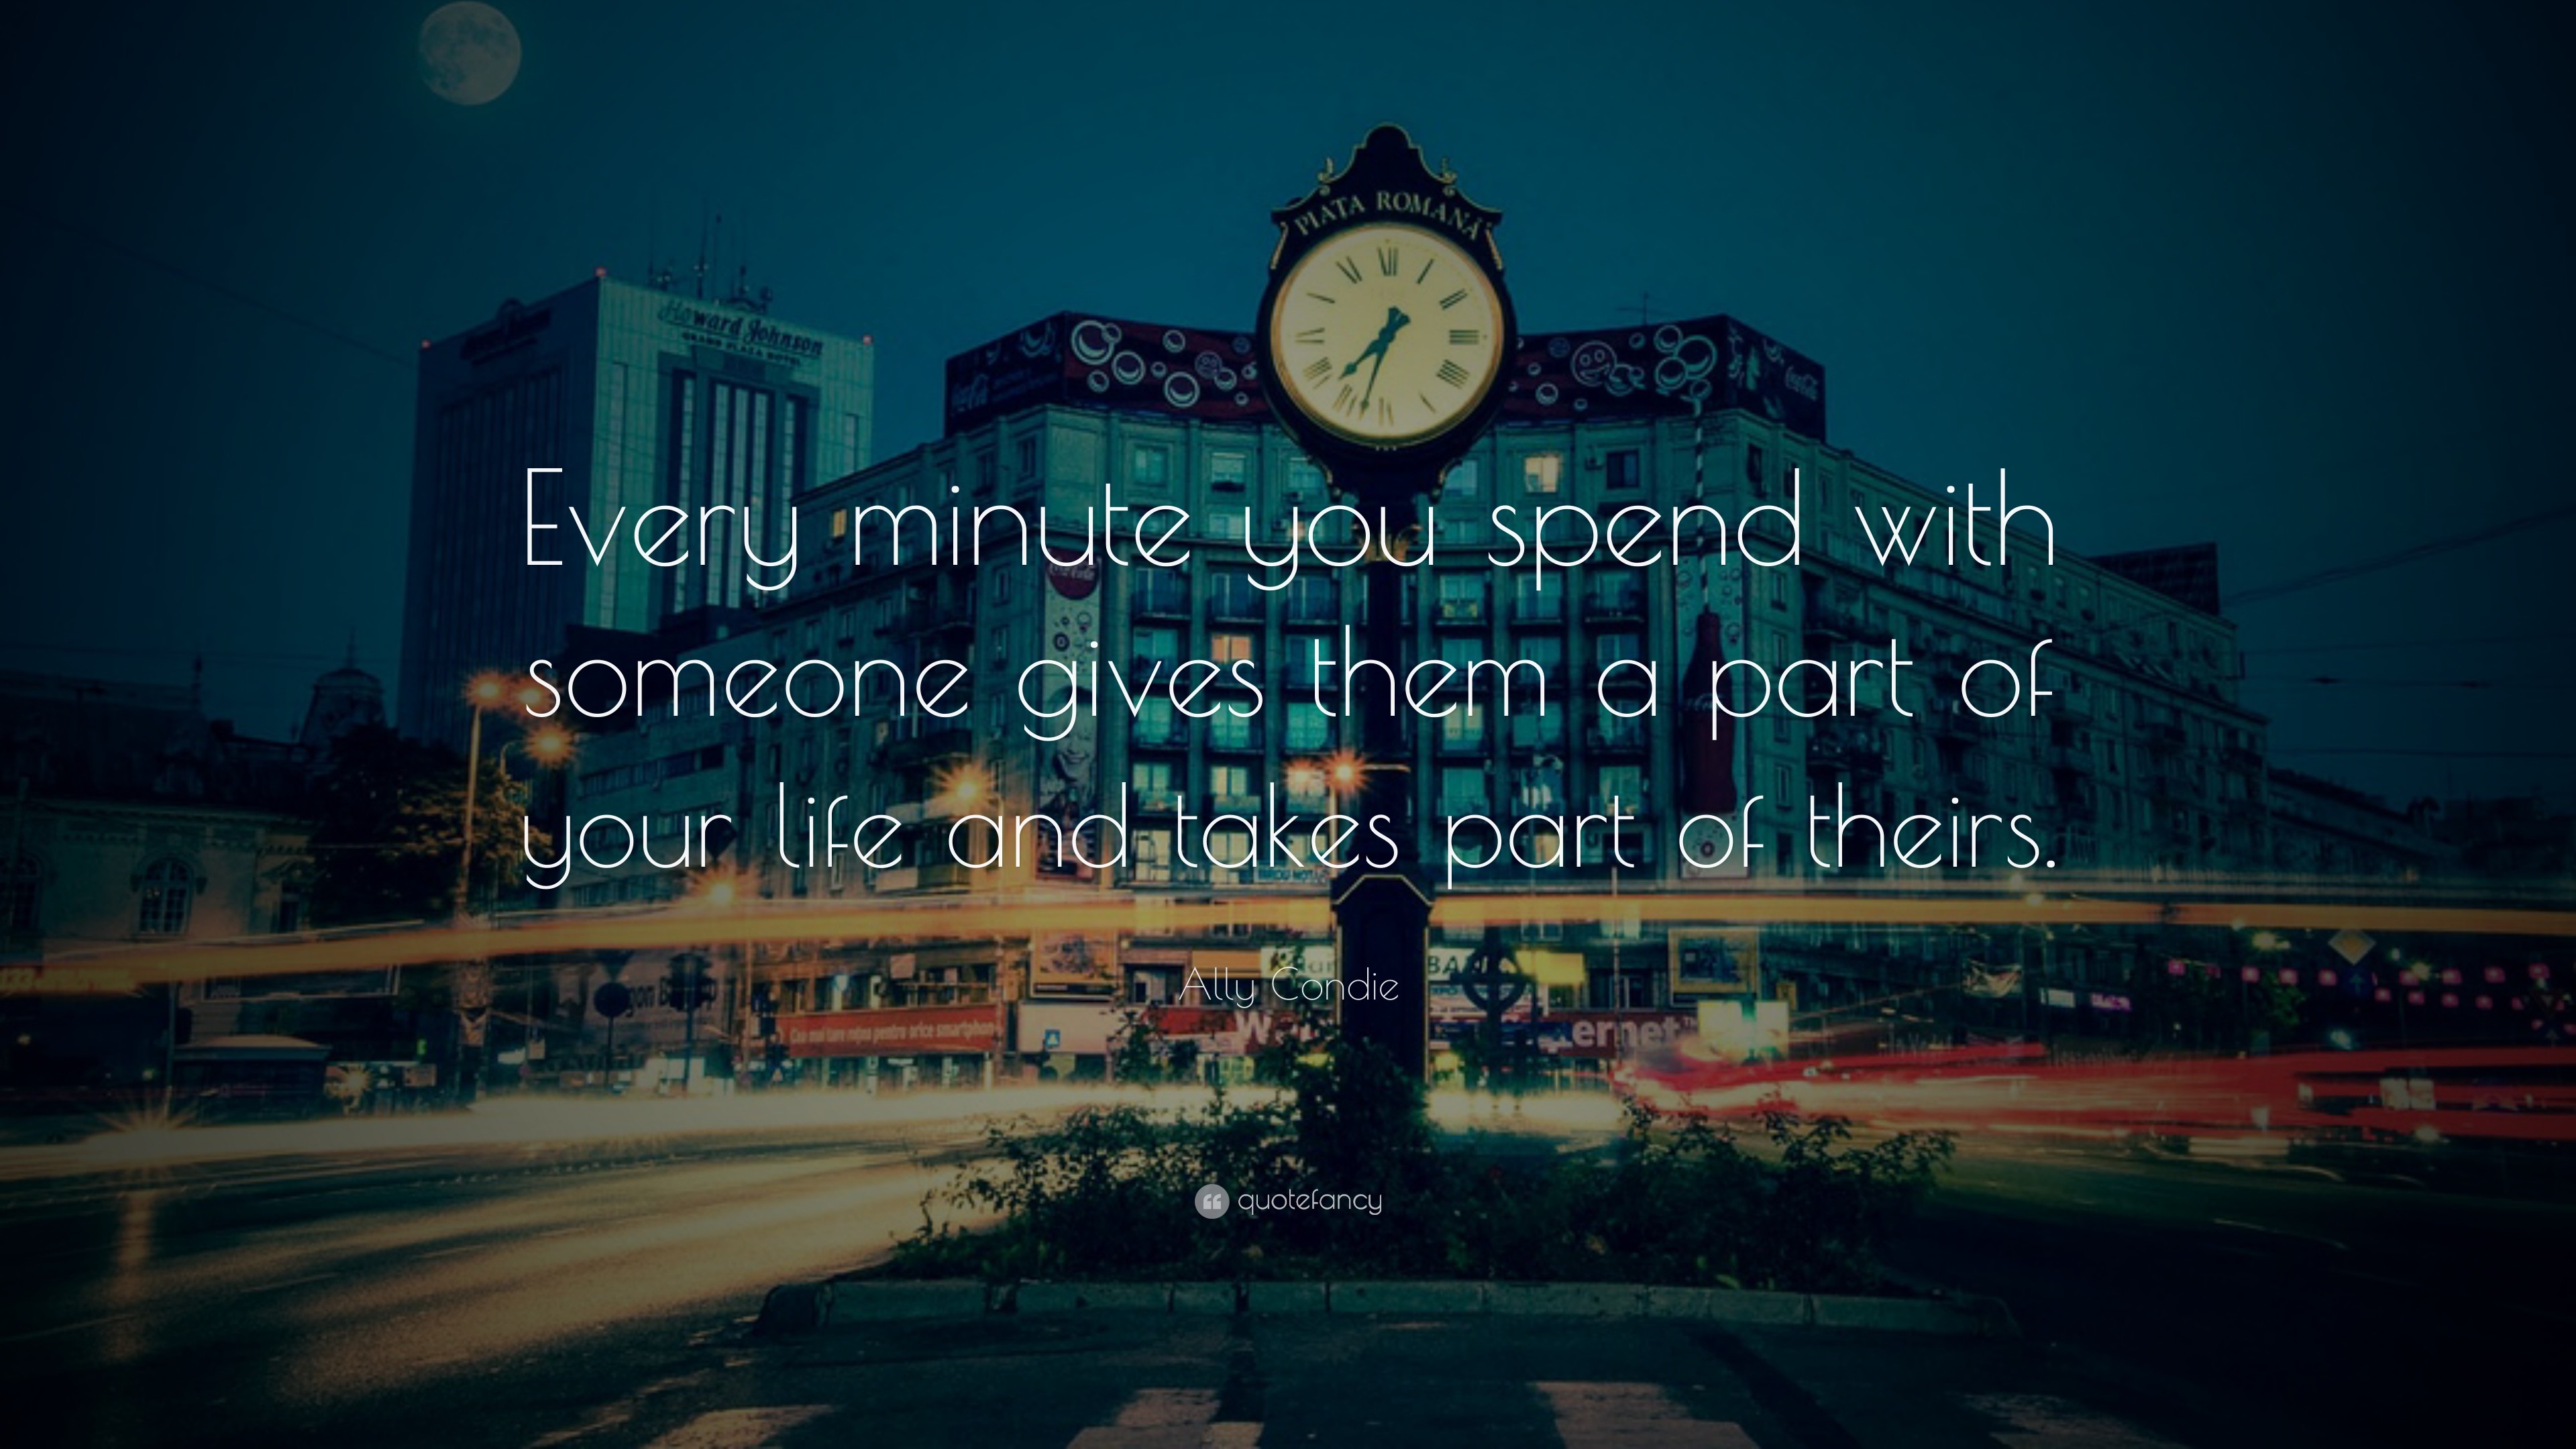 3840x2160 Life Quotes: “Every minute you spend with someone gives them a part of your